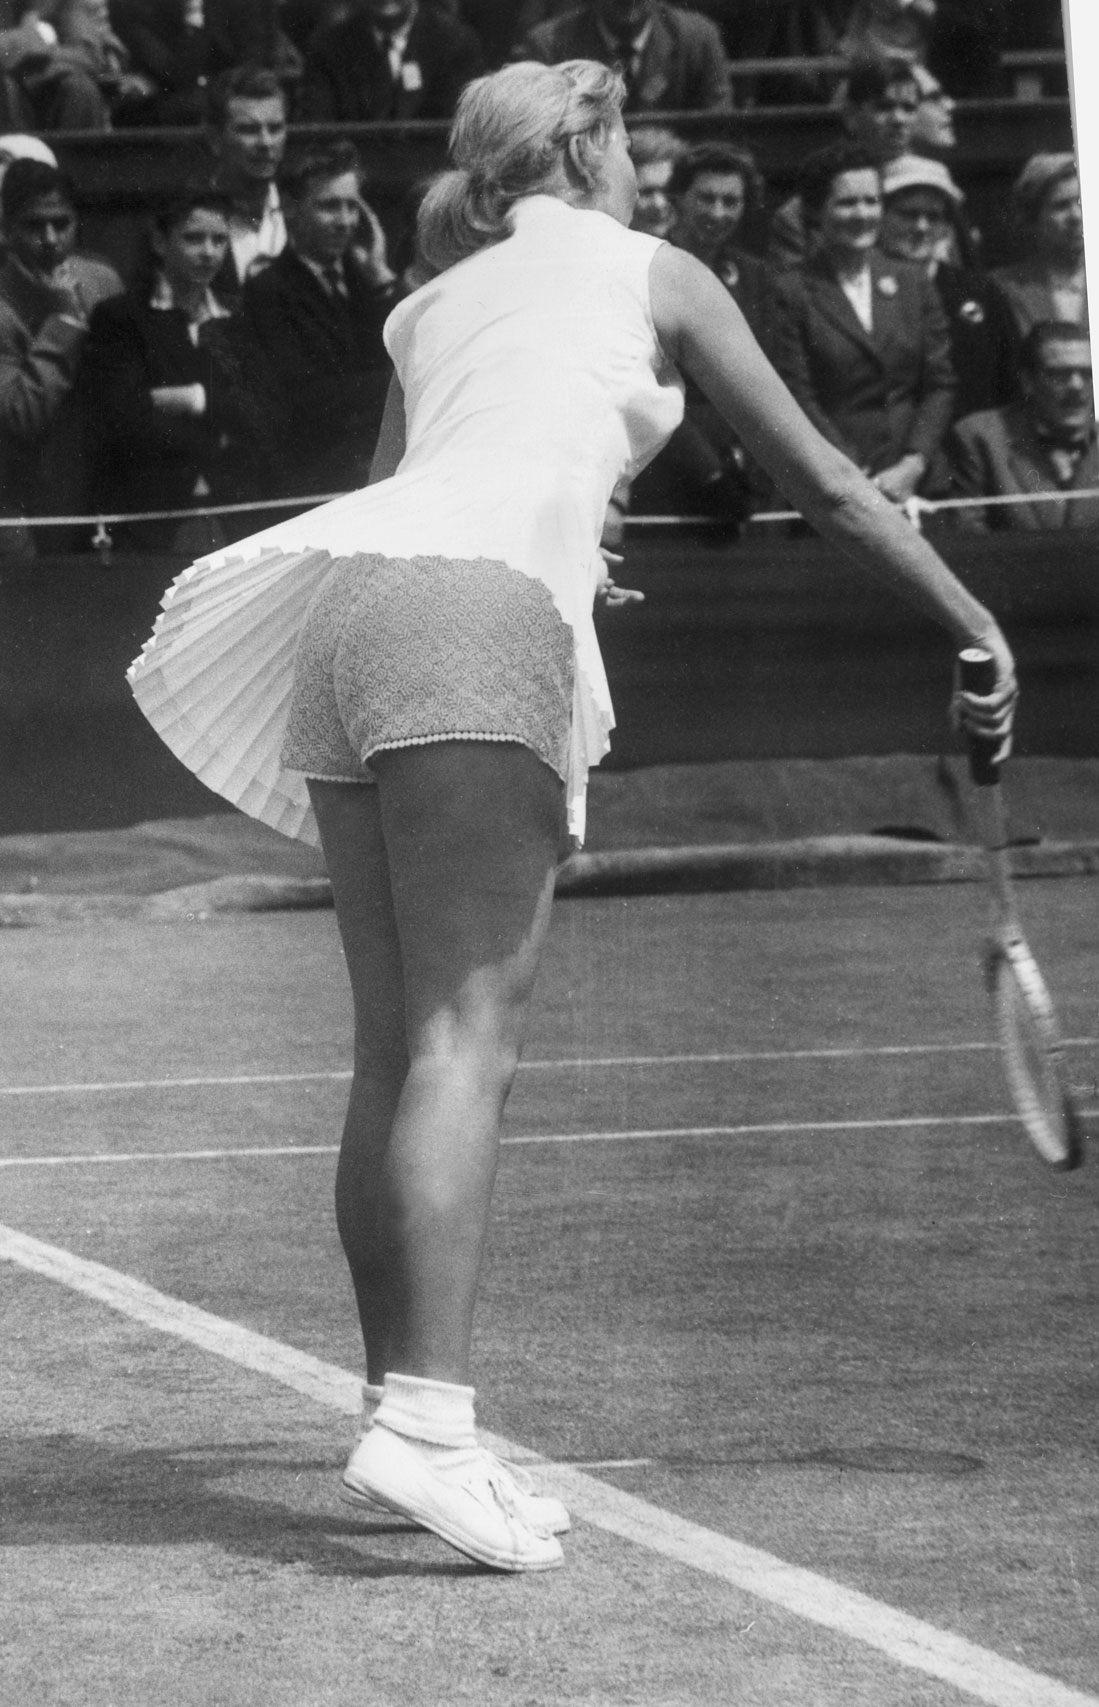 In 1958 Karol Fageros was banned when she showed up for her match wearing gold lame undergarments. She was allowed back when she covered the undergarments with white lace.